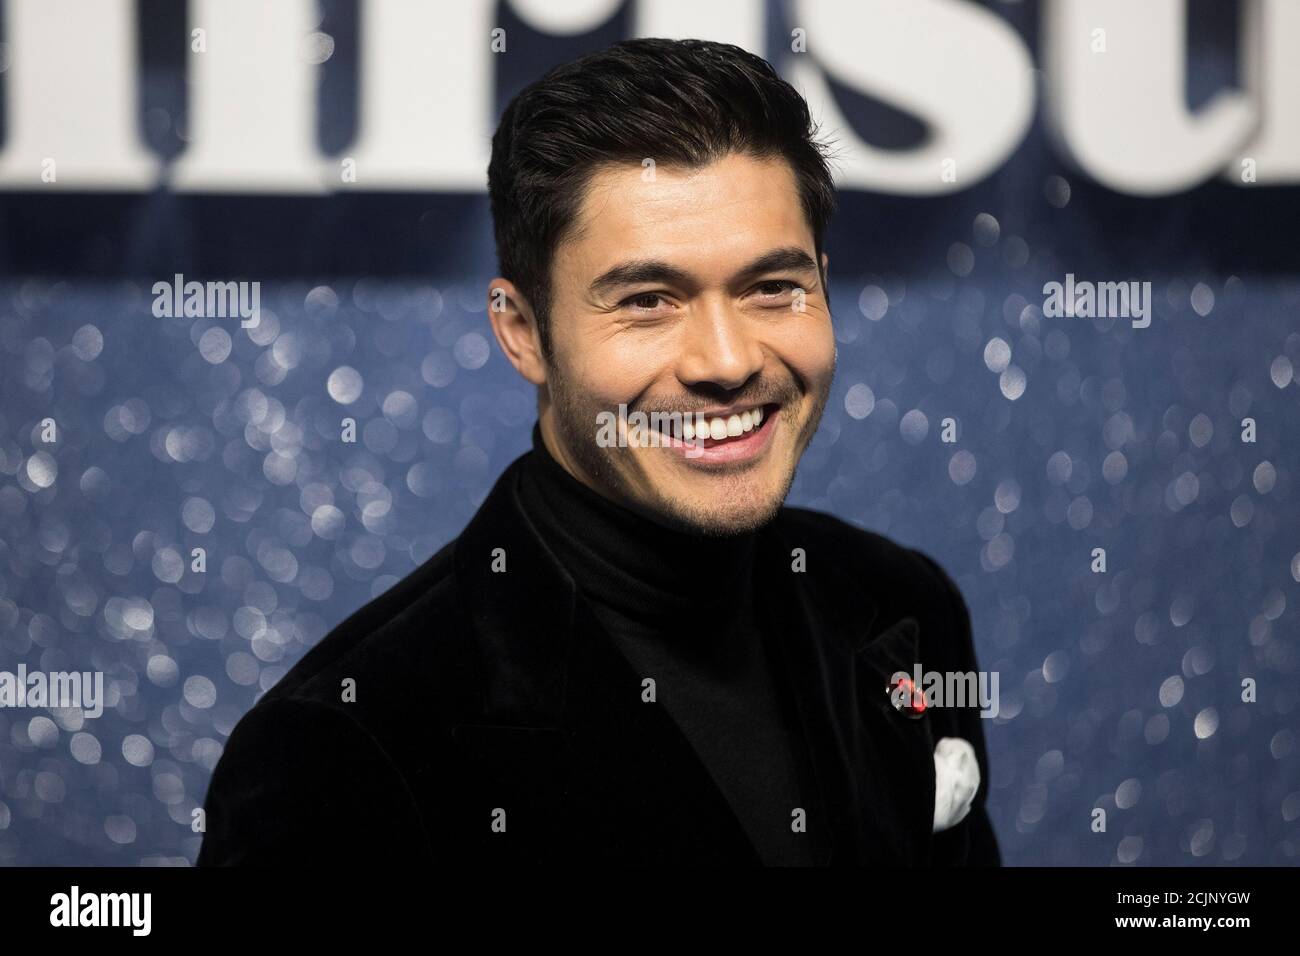 Actor Henry Golding poses as he arrives for the U.K. premiere of 'Last Christmas' in London, Britain, November 11, 2019. REUTERS/Simon Dawson Stock Photo